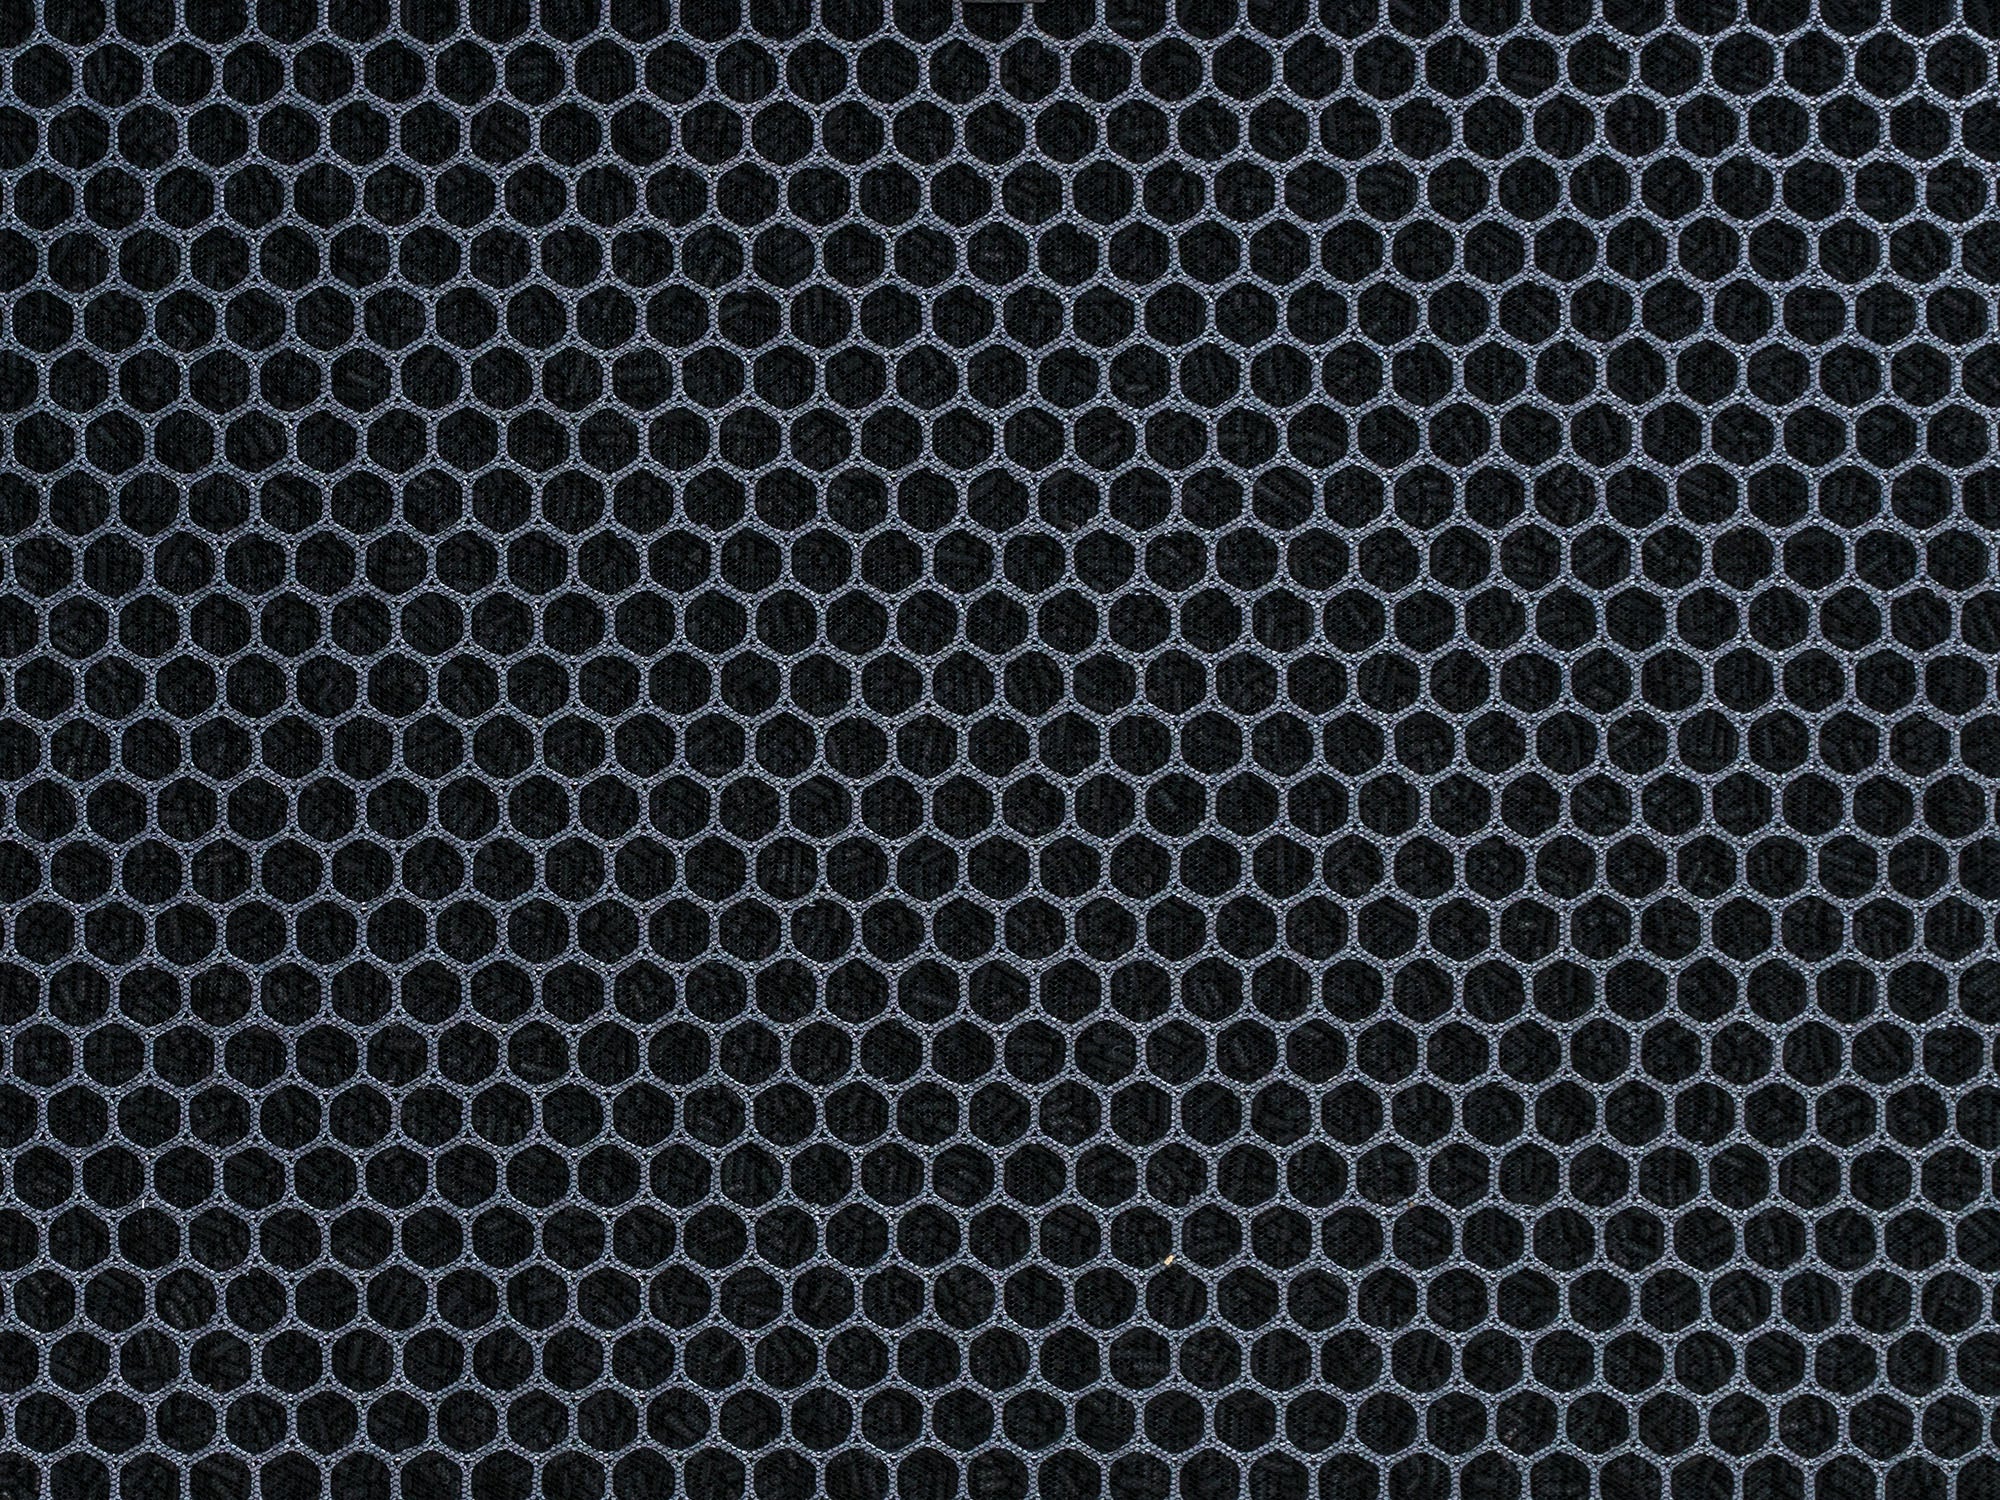 Activated Carbon Air Filters: How Do They Work? - Molekule